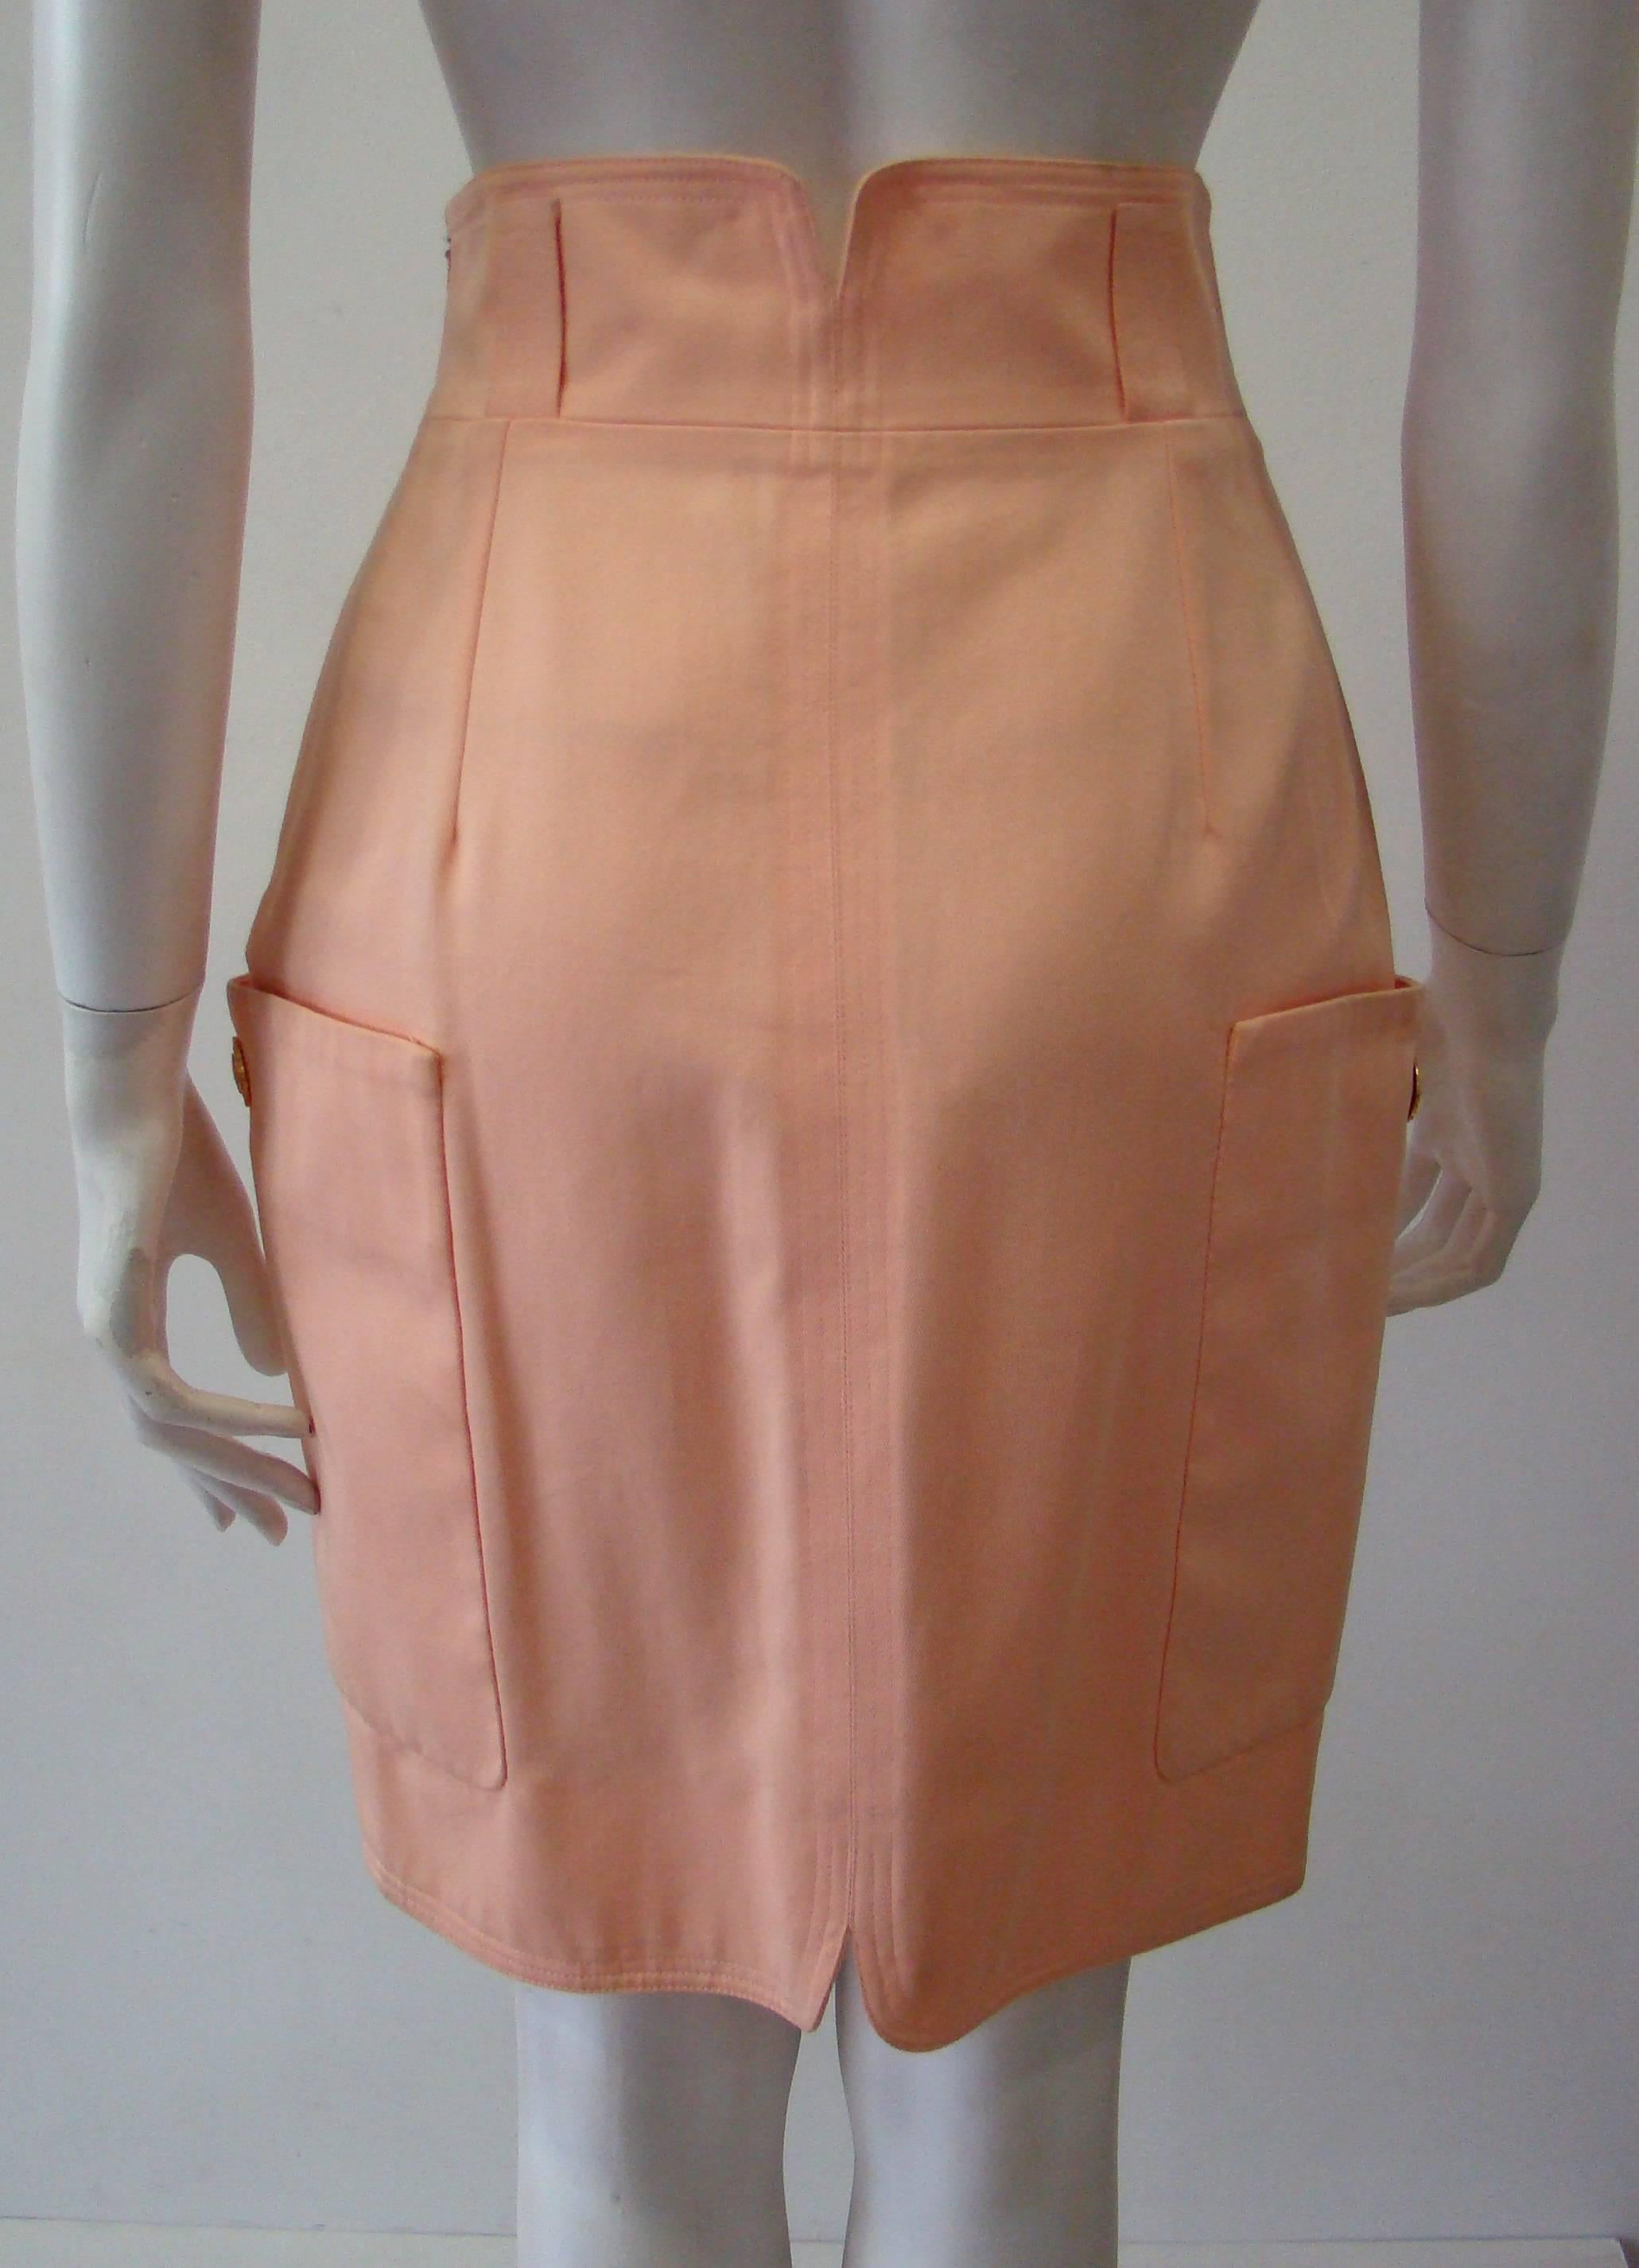 Gianni Versace Couture Salmon High Waist Pencil Skirt Spring 1992 For Sale 2